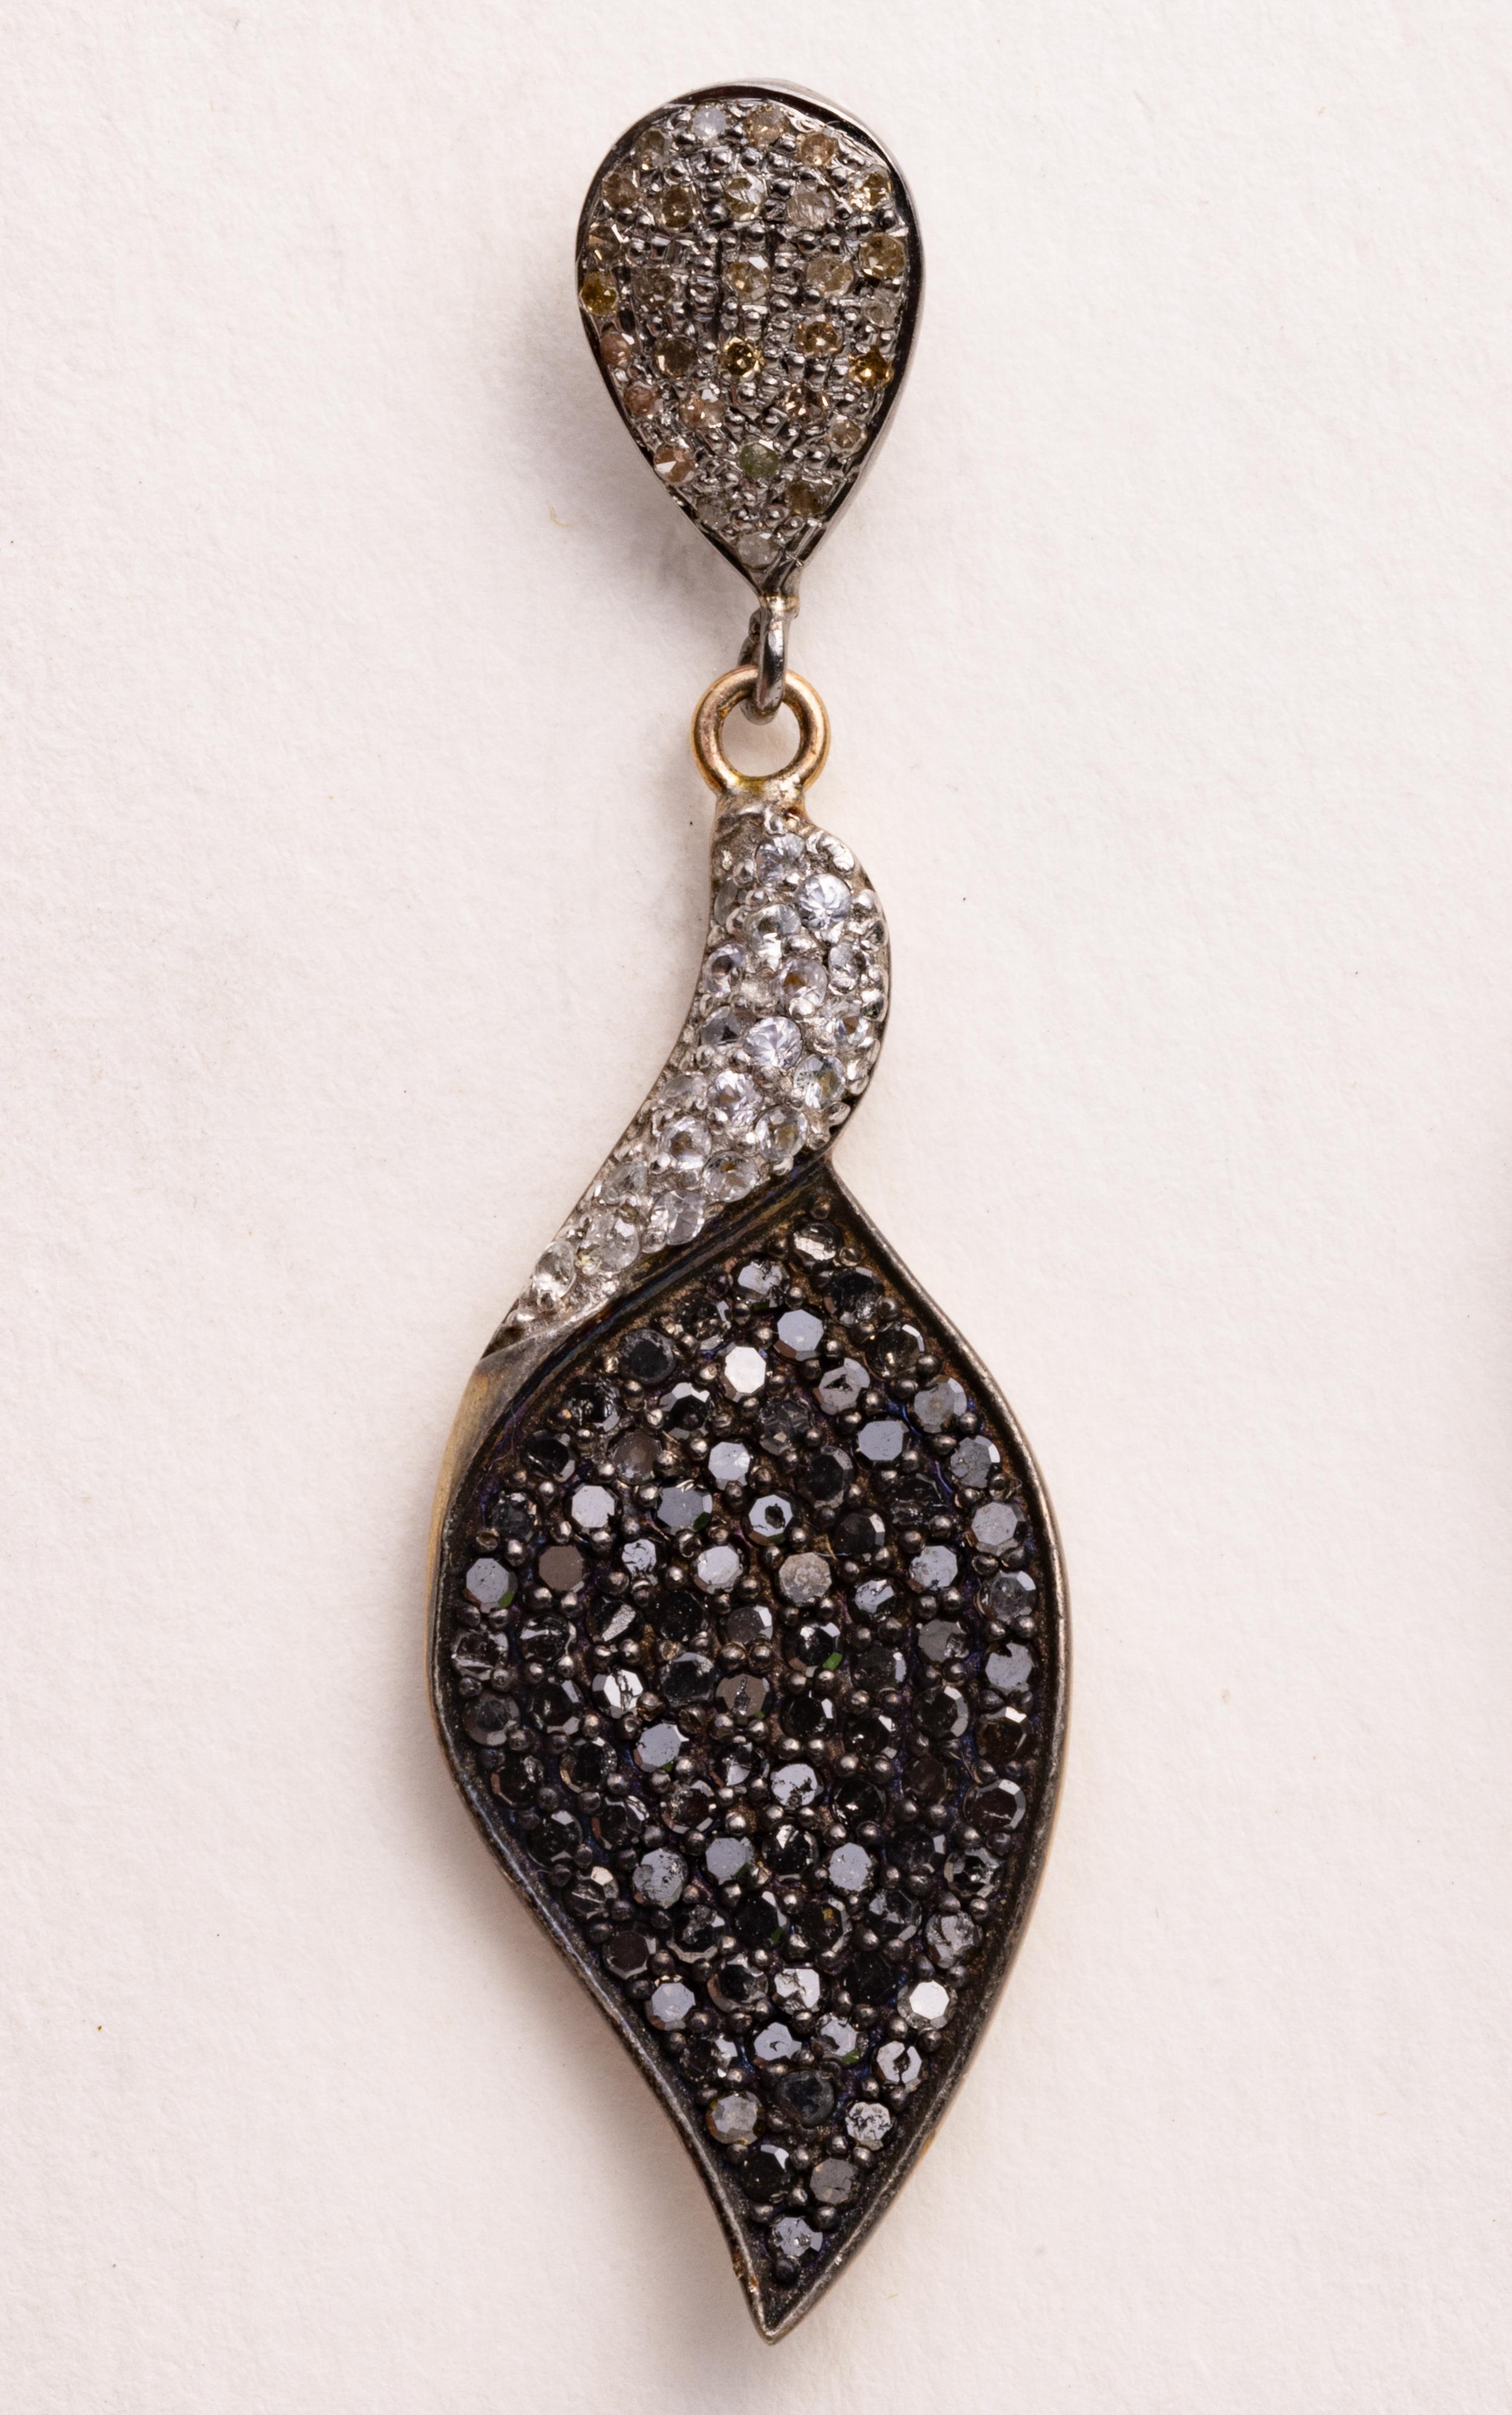 A pair of dangle earrings comprised of black and white diamonds.  All are round, brilliant cut diamonds in a pave` setting.  Set in sterling silver with an 18K gold post for pierced ears.

The fine jewelry collection is sourced, designed or created